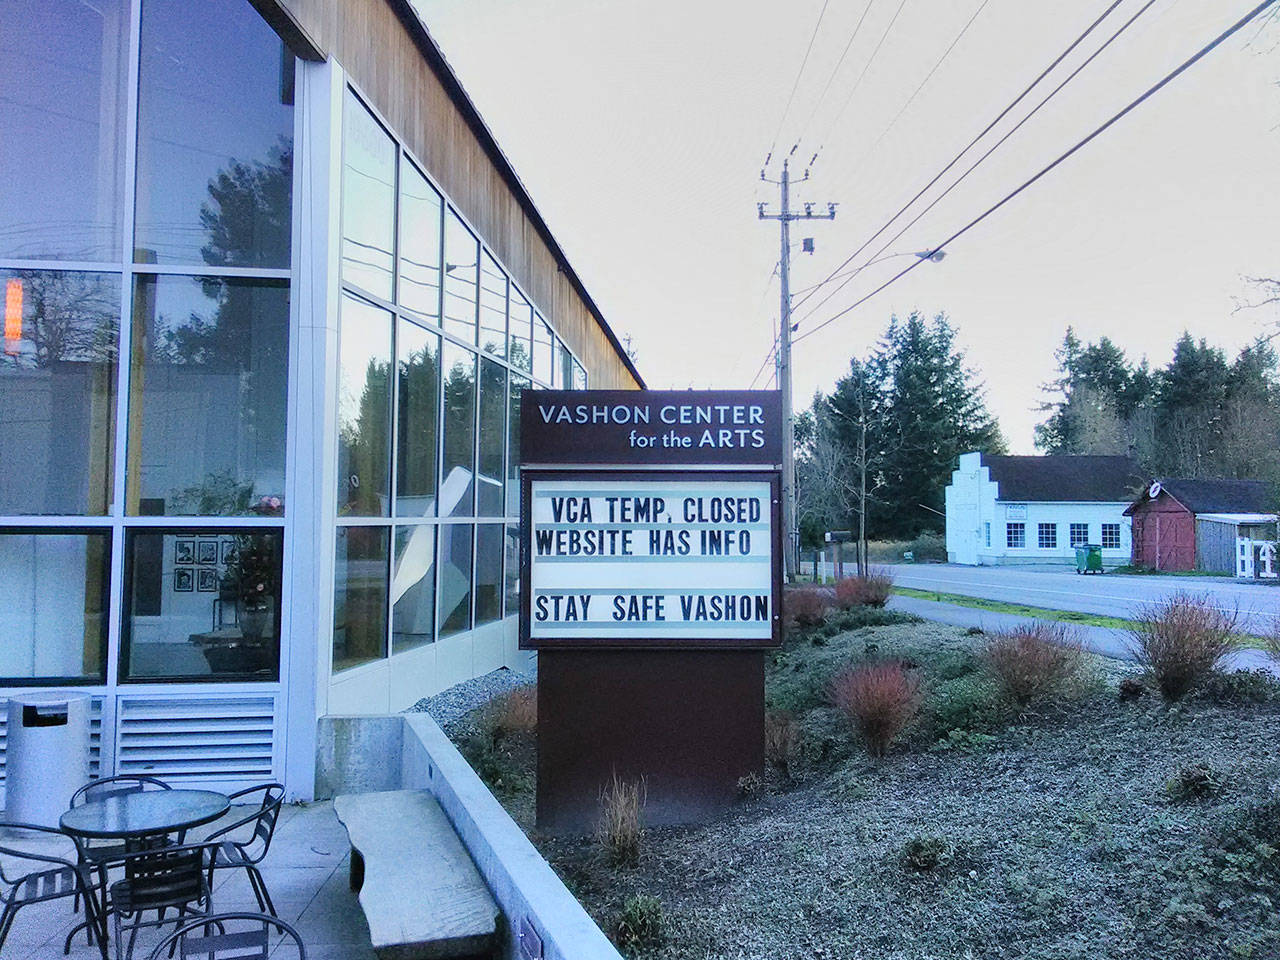 Vashon Center for the Arts has temporarily closed, in response to the public health crisis caused by the coronavirus (Paul Rowley Photo).